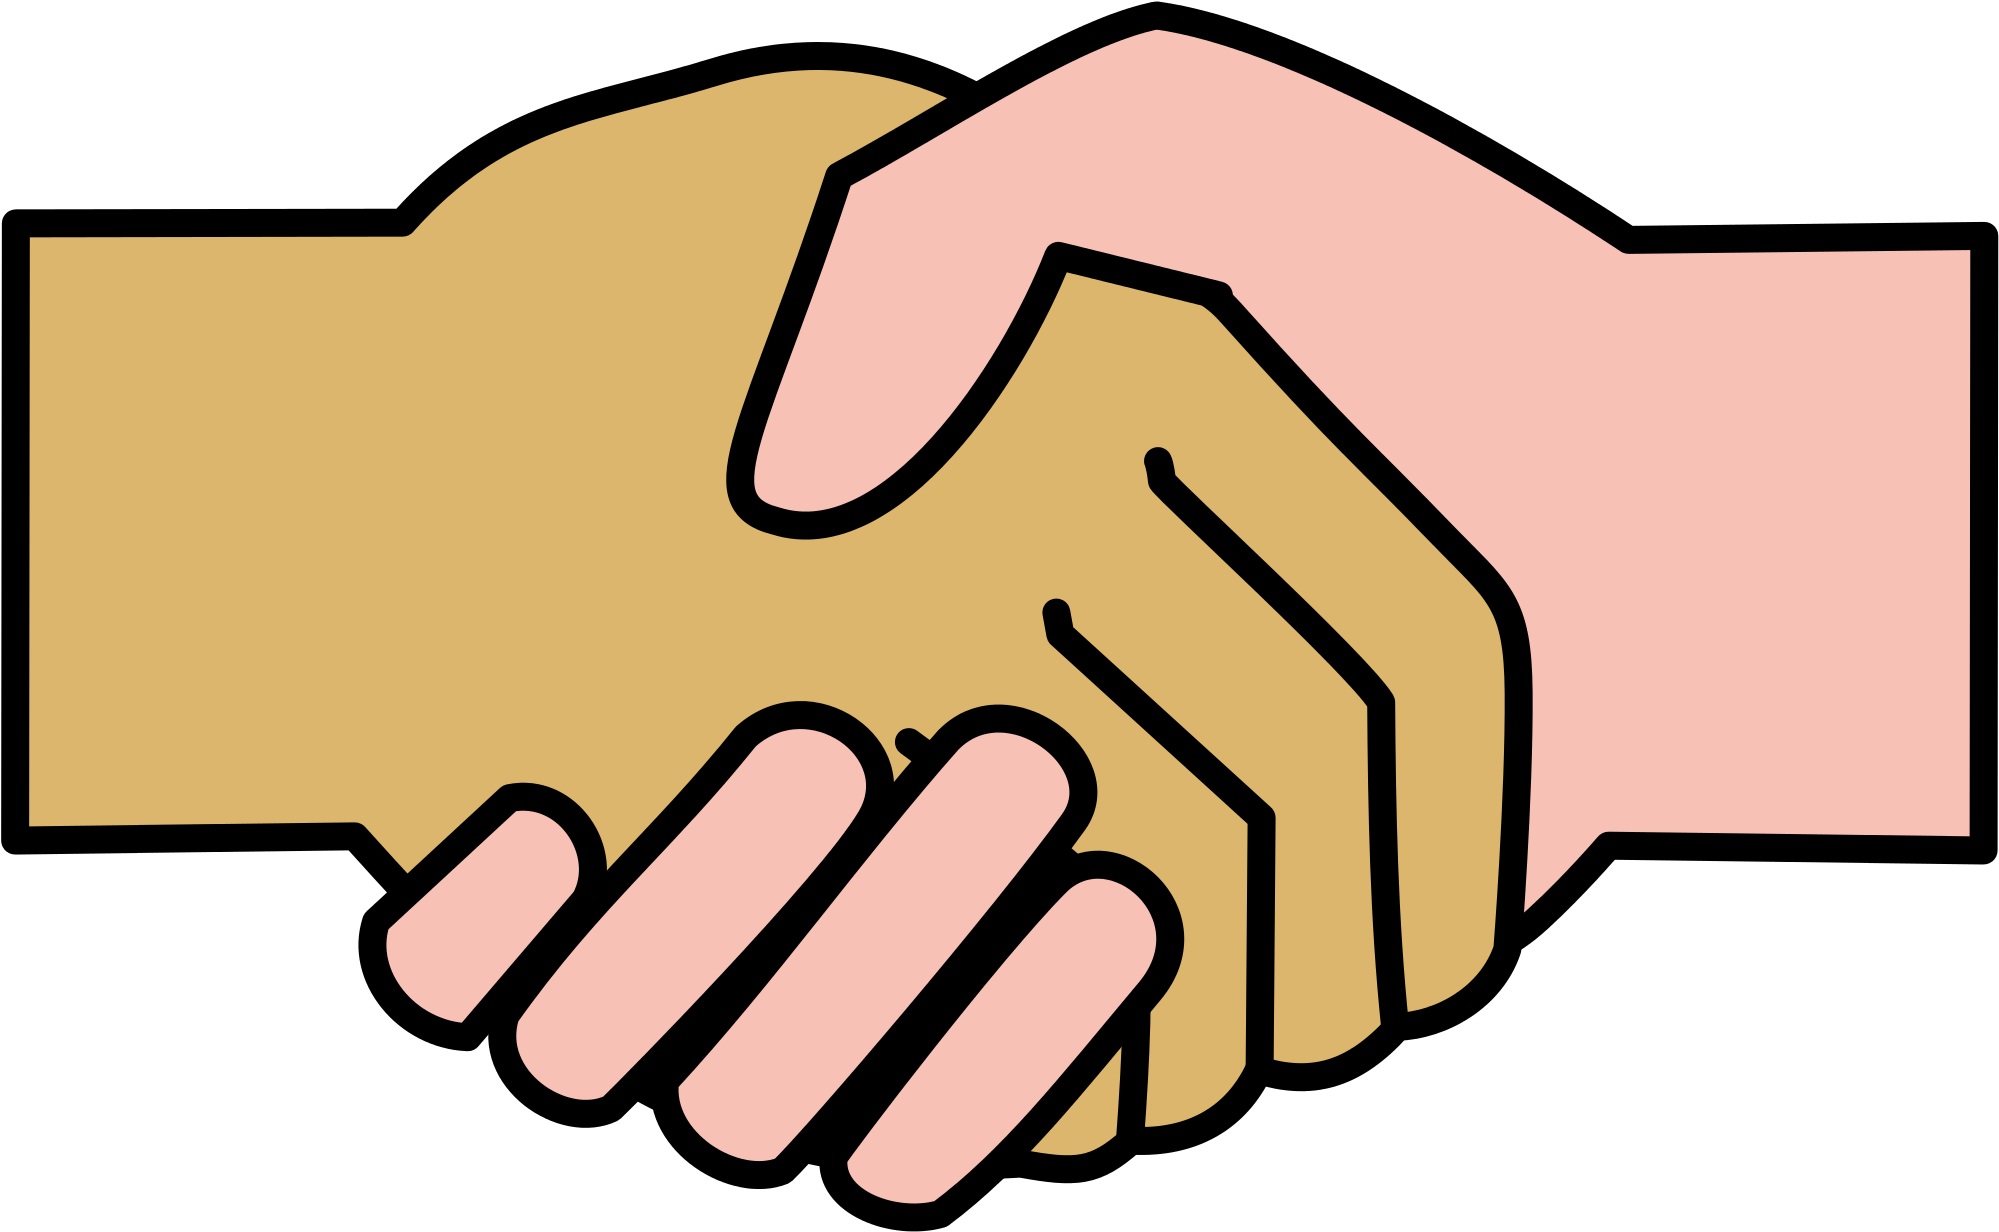 File - Handshake Icon - Svg - Wikimedia Commons - No Conflict Of Interest (2000x2000)